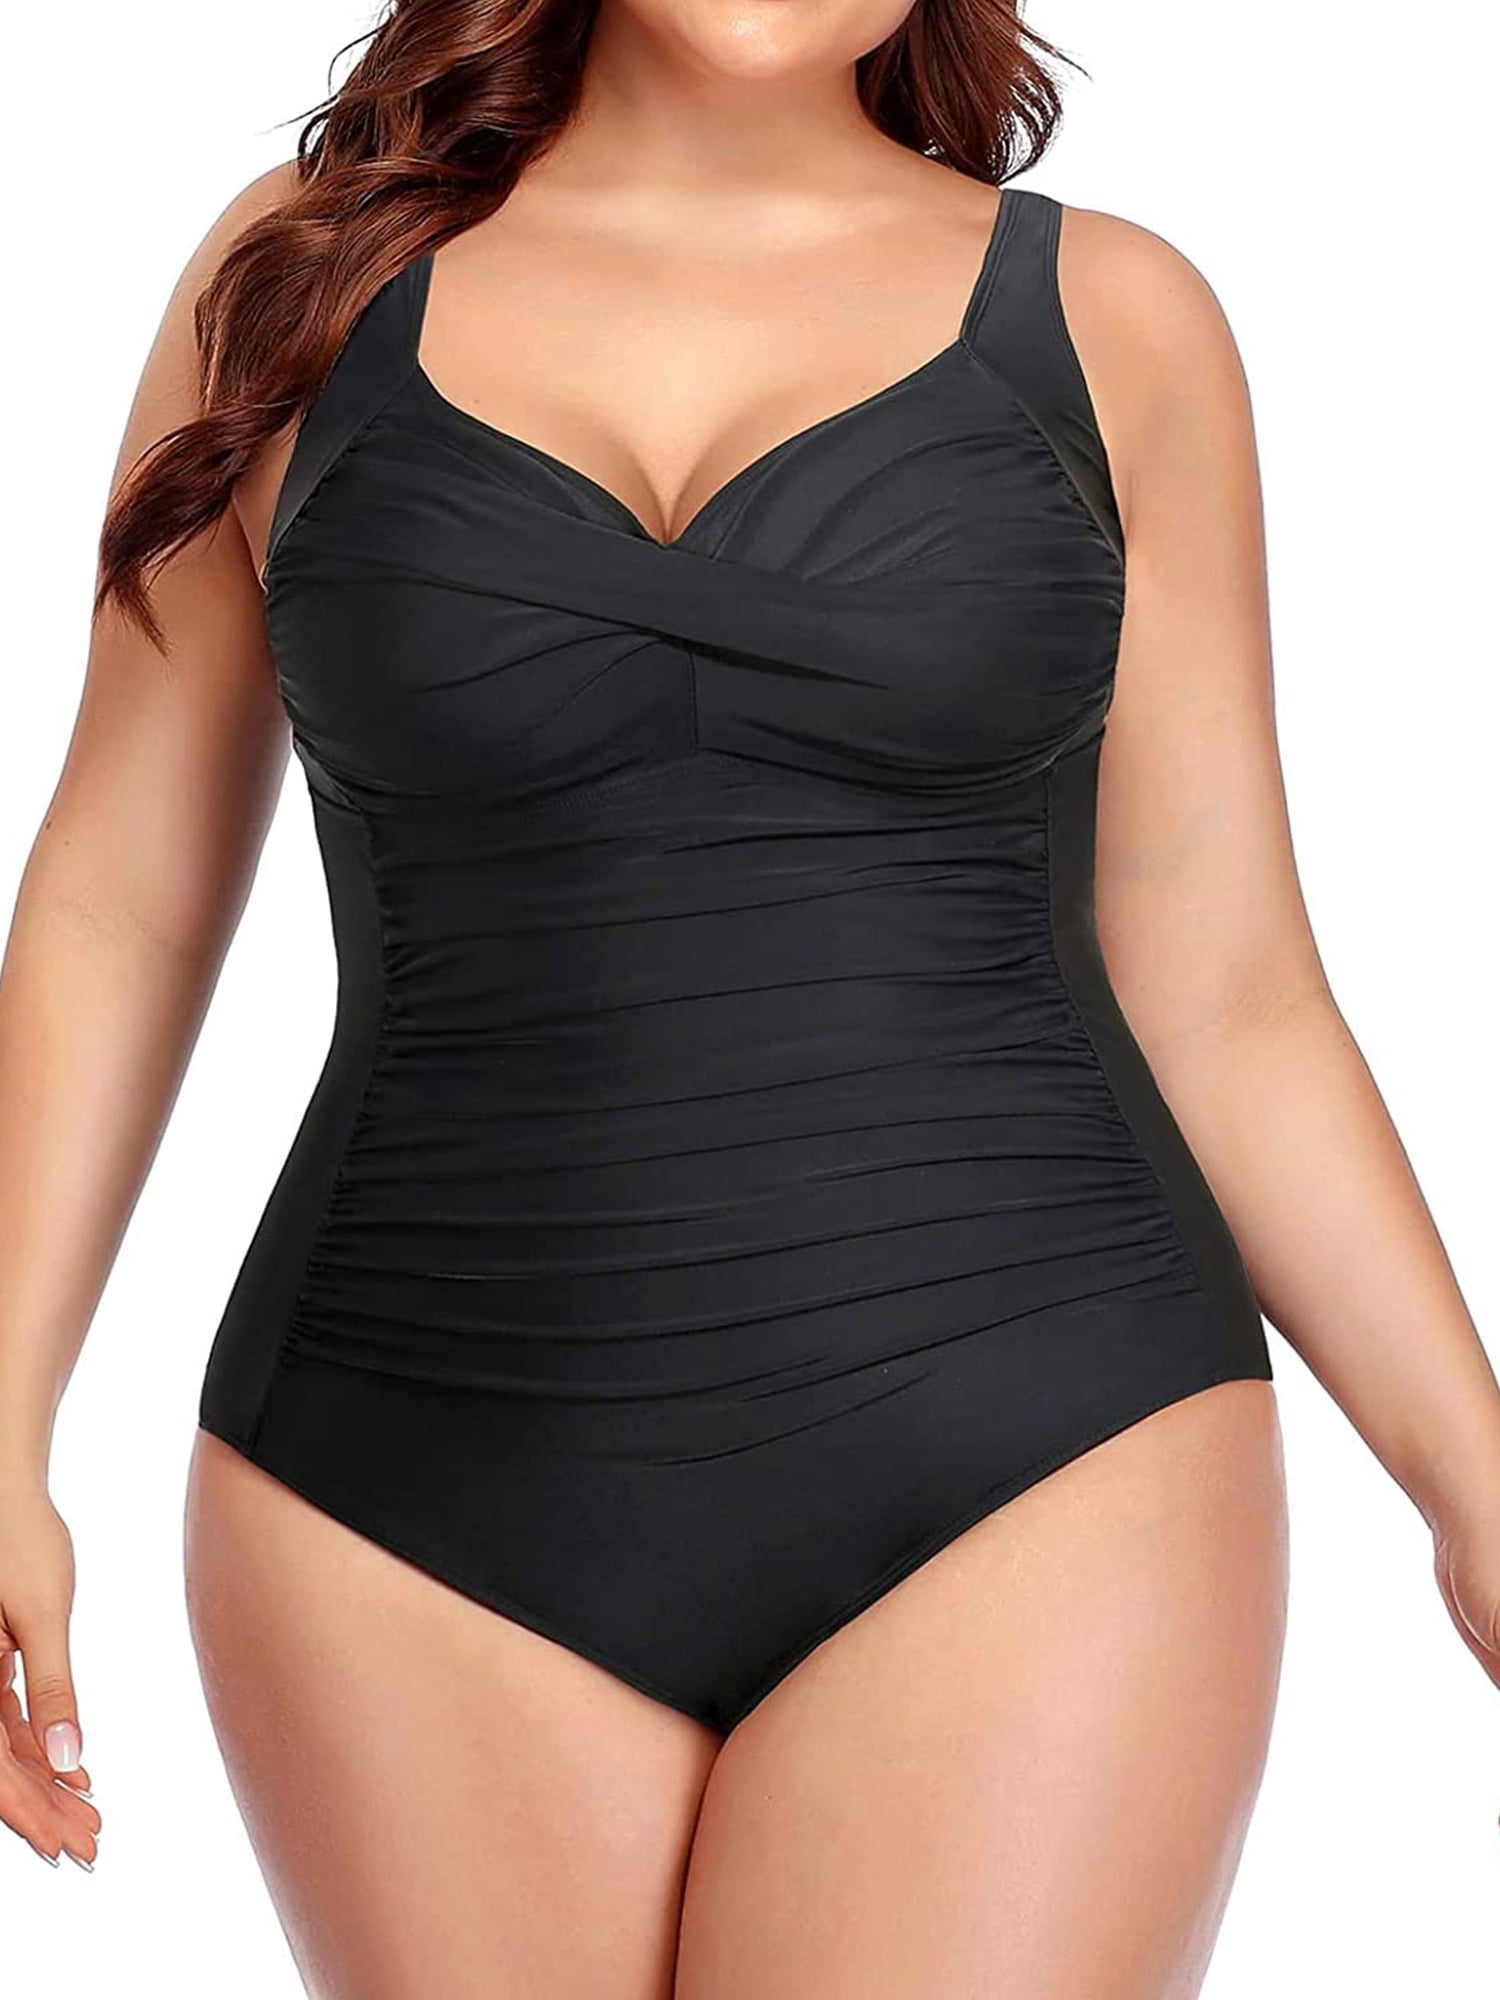 Chama Plus Size One Piece Swimsuit for Women Twist Front Tummy